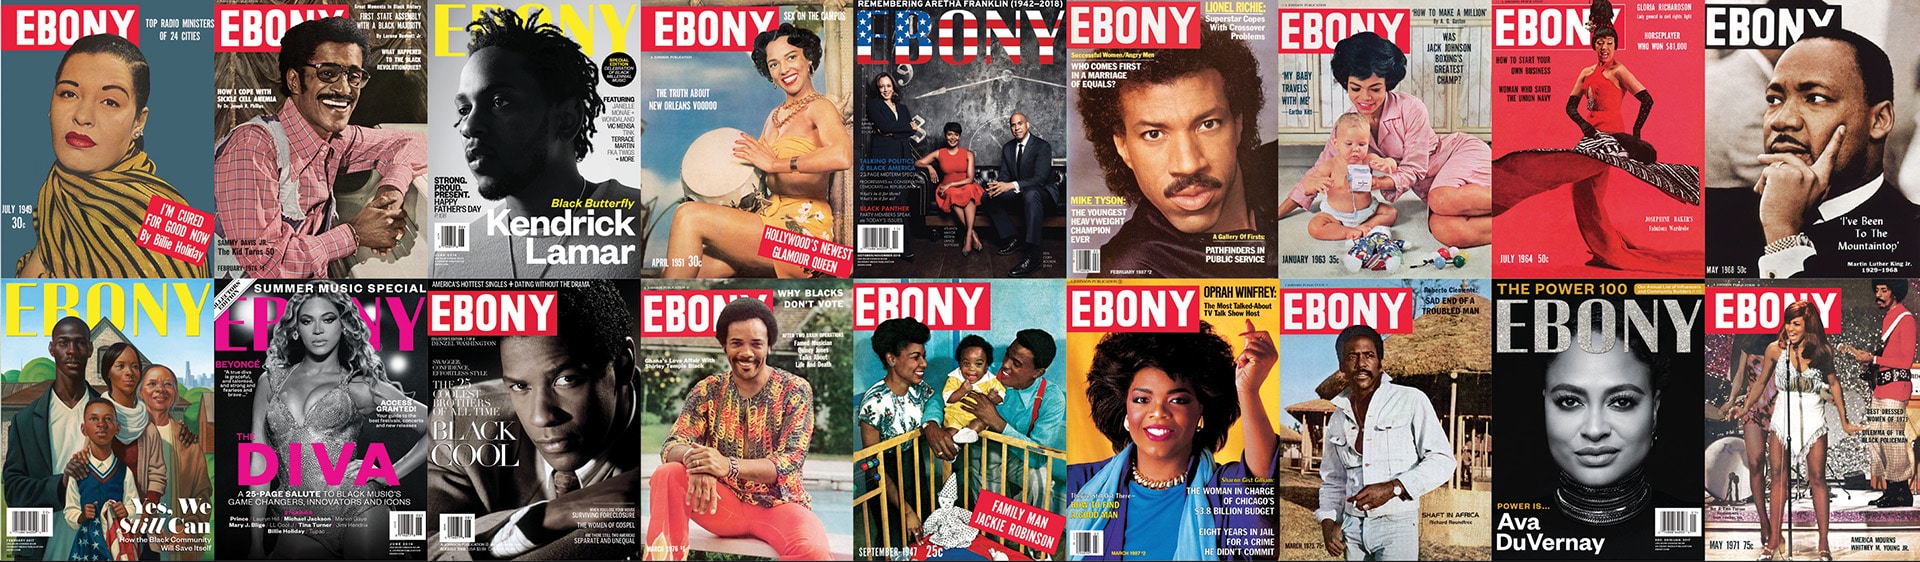 How Ebony Became the Gold Standard of Black American Photo Magazines